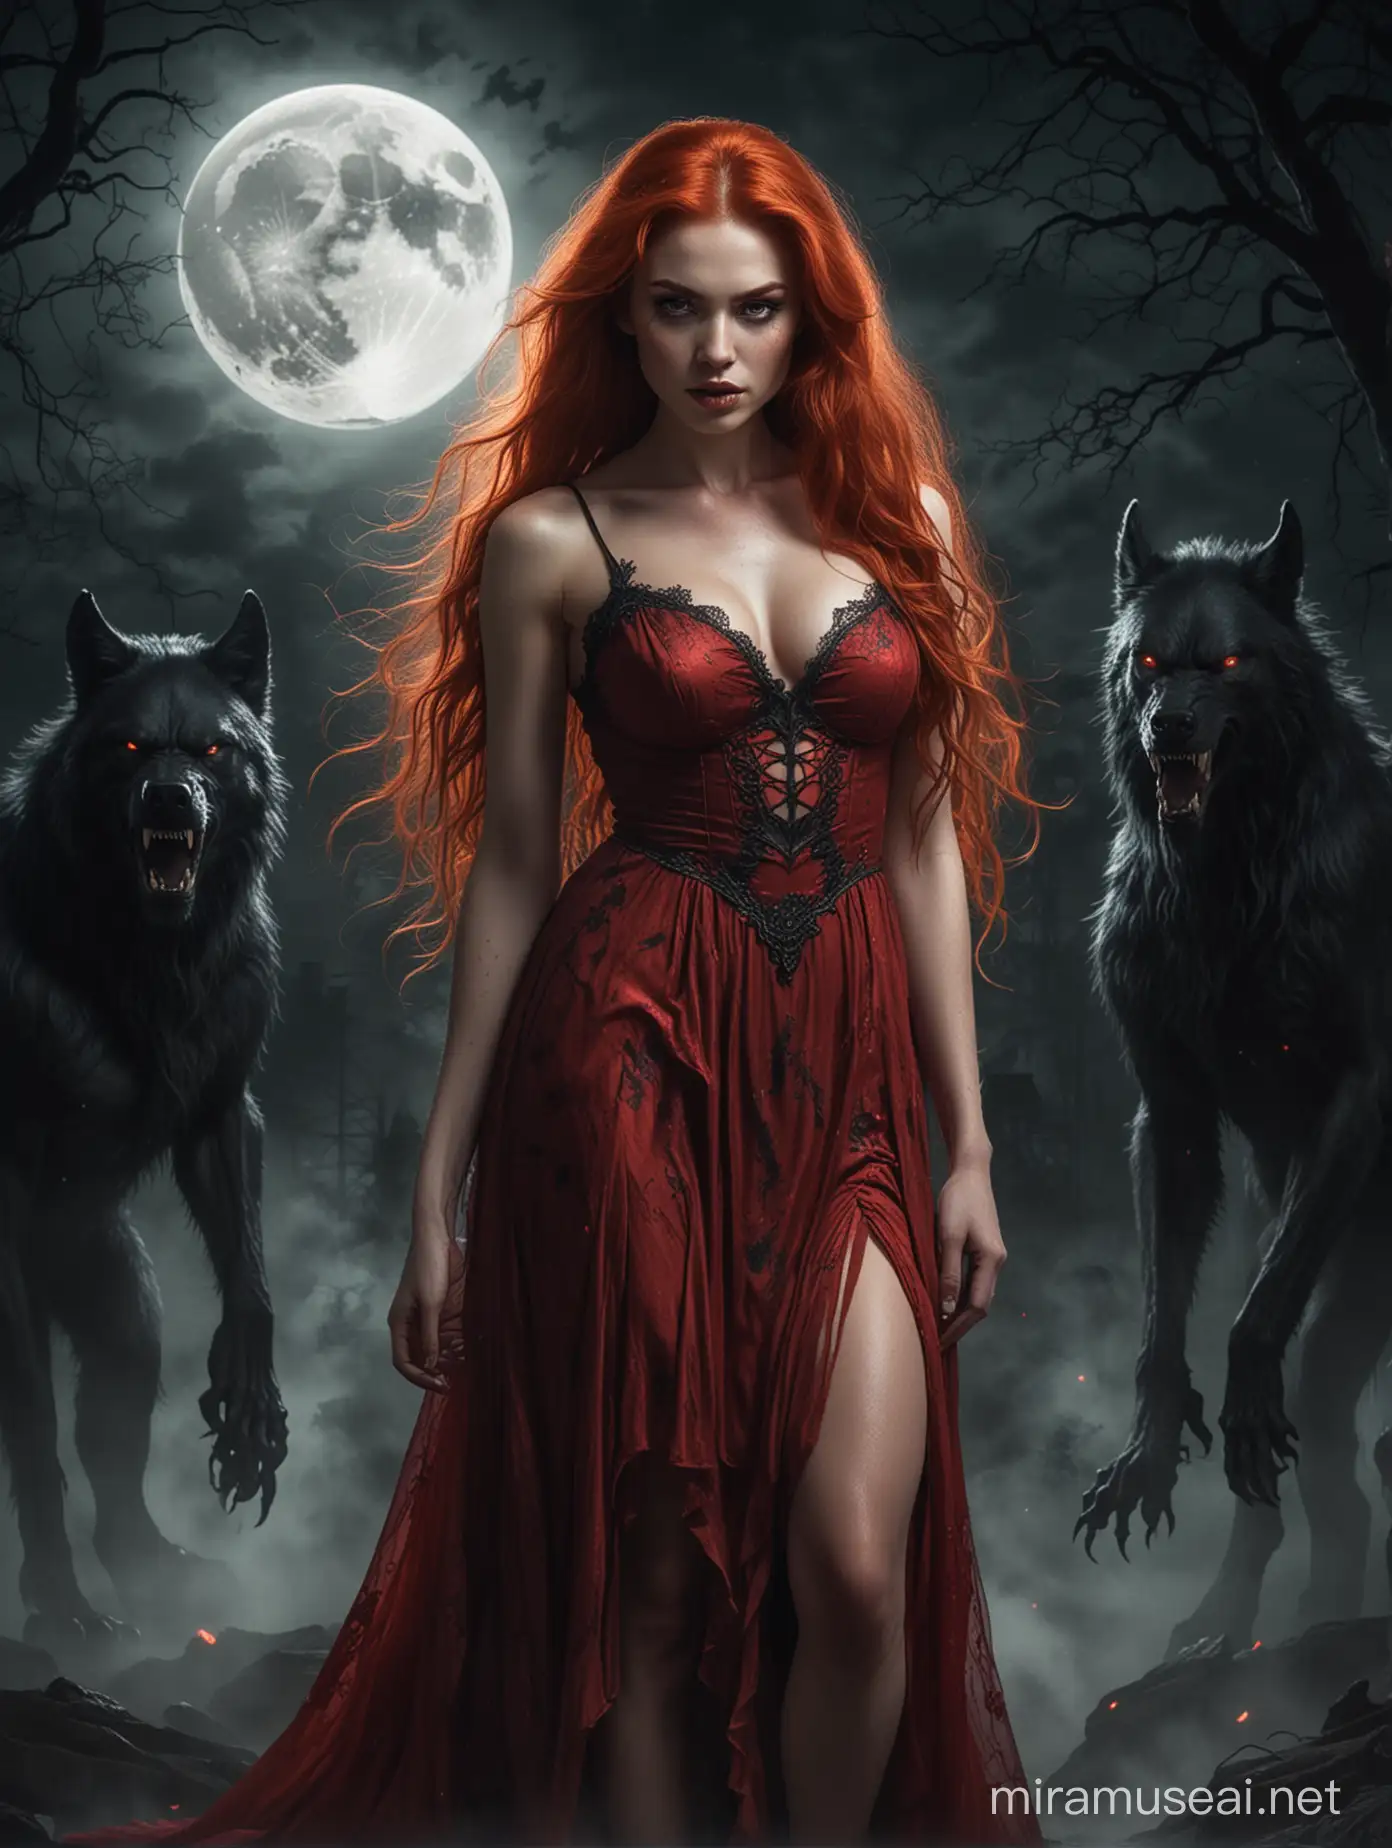 Two beautiful red hair ladies in a glowing bloody red dress, with a mighty black creepy werewolf standing fierce behind her in the dark night, and a glowing moon with a goddess face shining inside it.